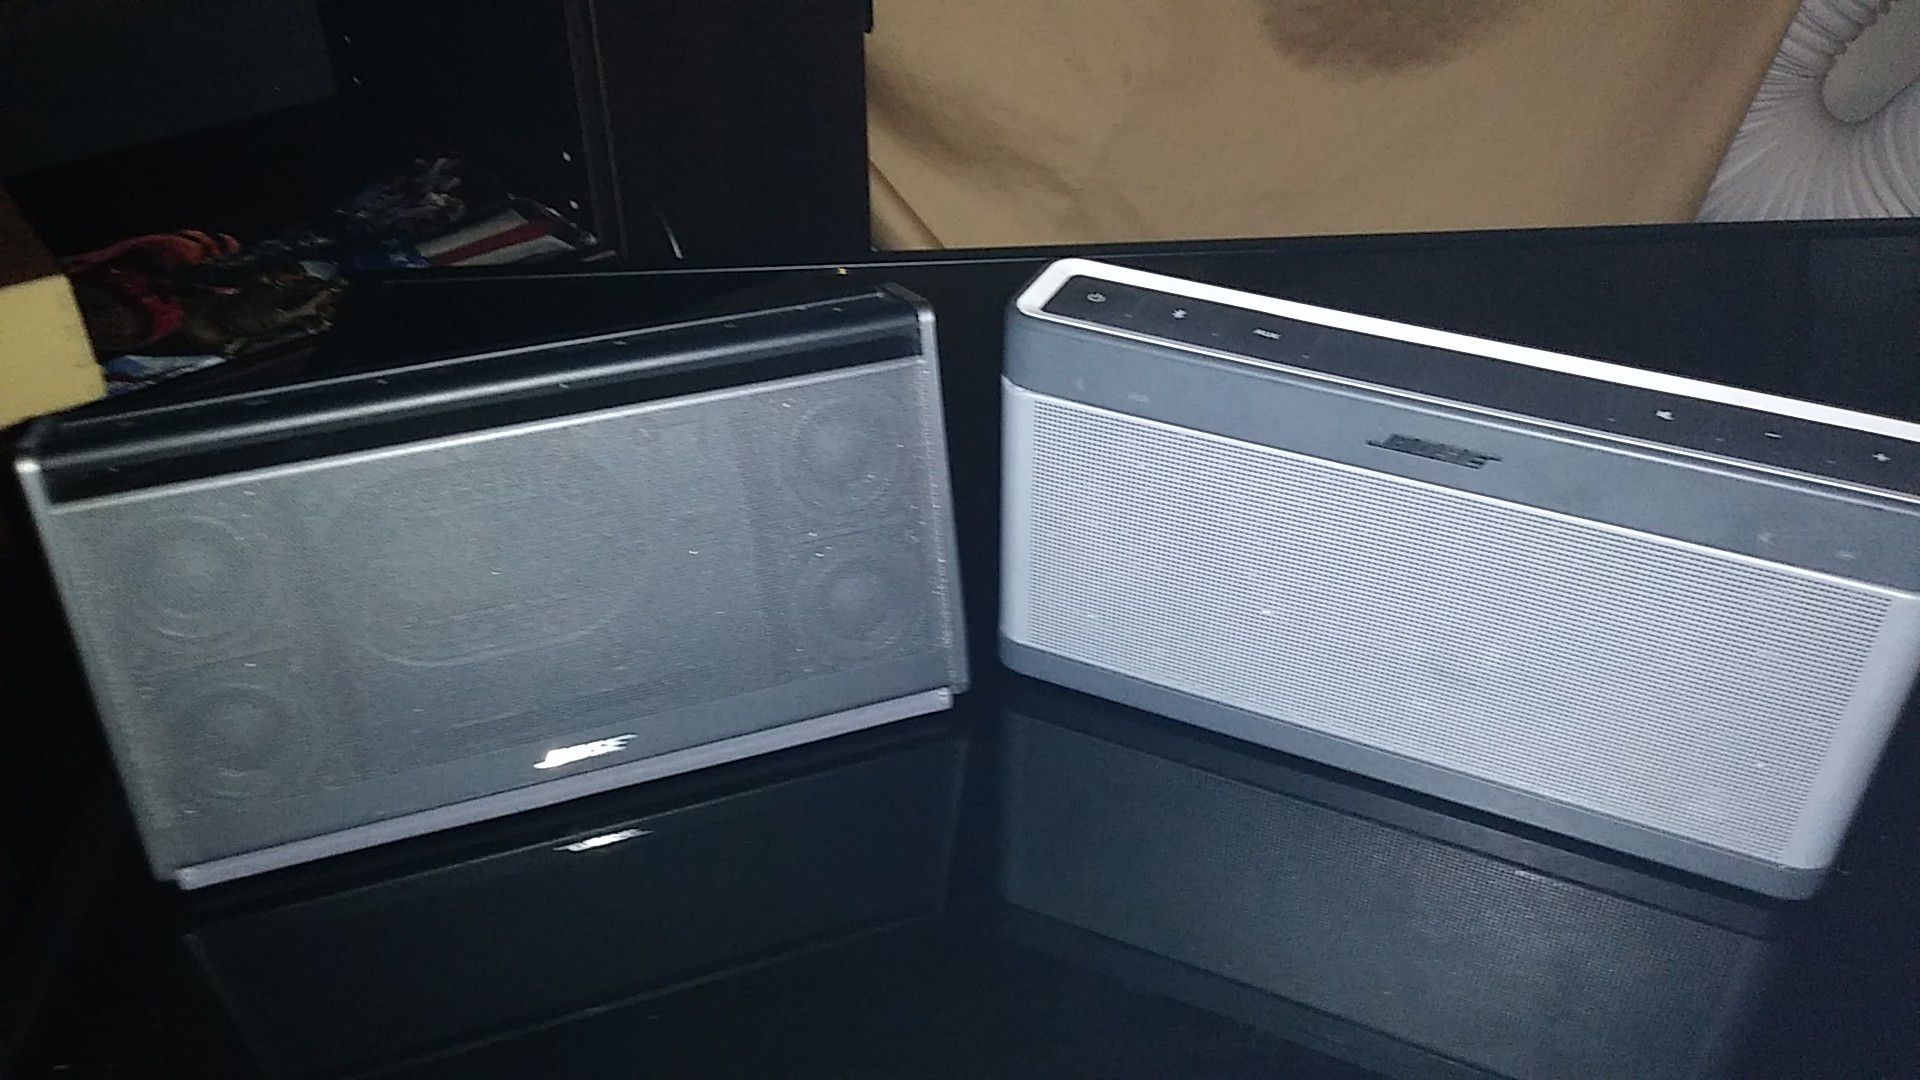 Two bose portable speakers with charger.